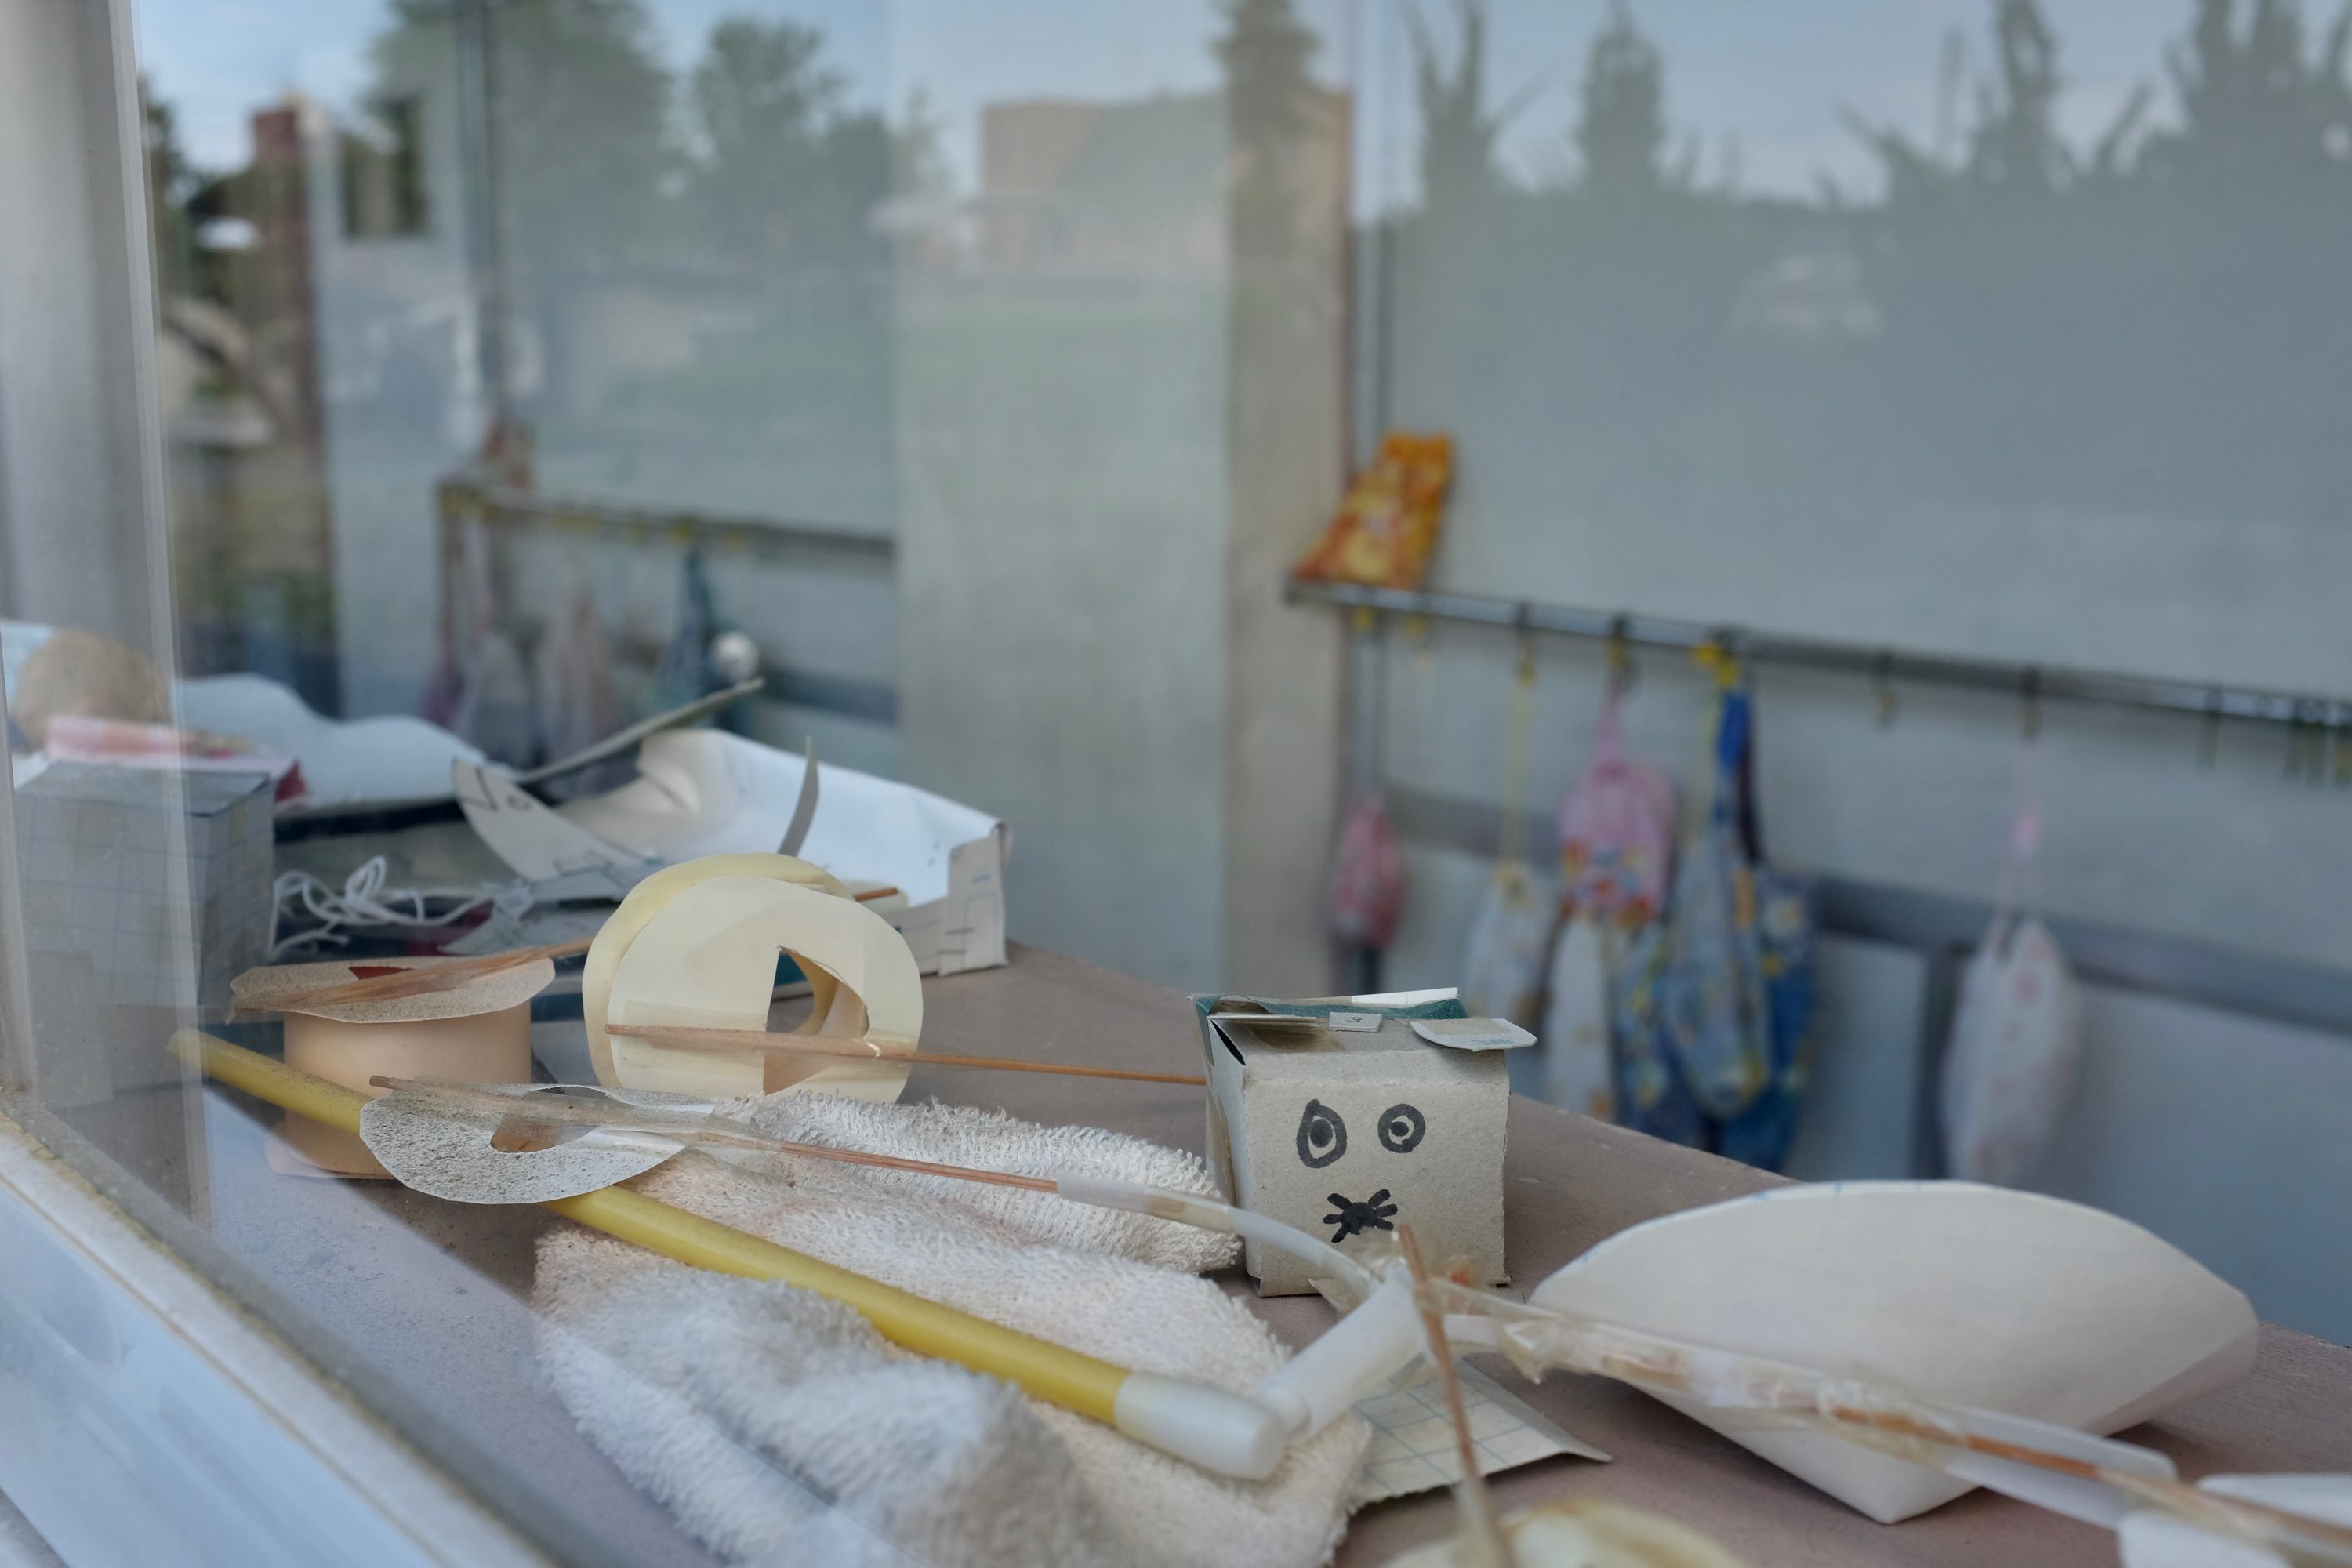 Craft tools and a paper rabbit in a school window.